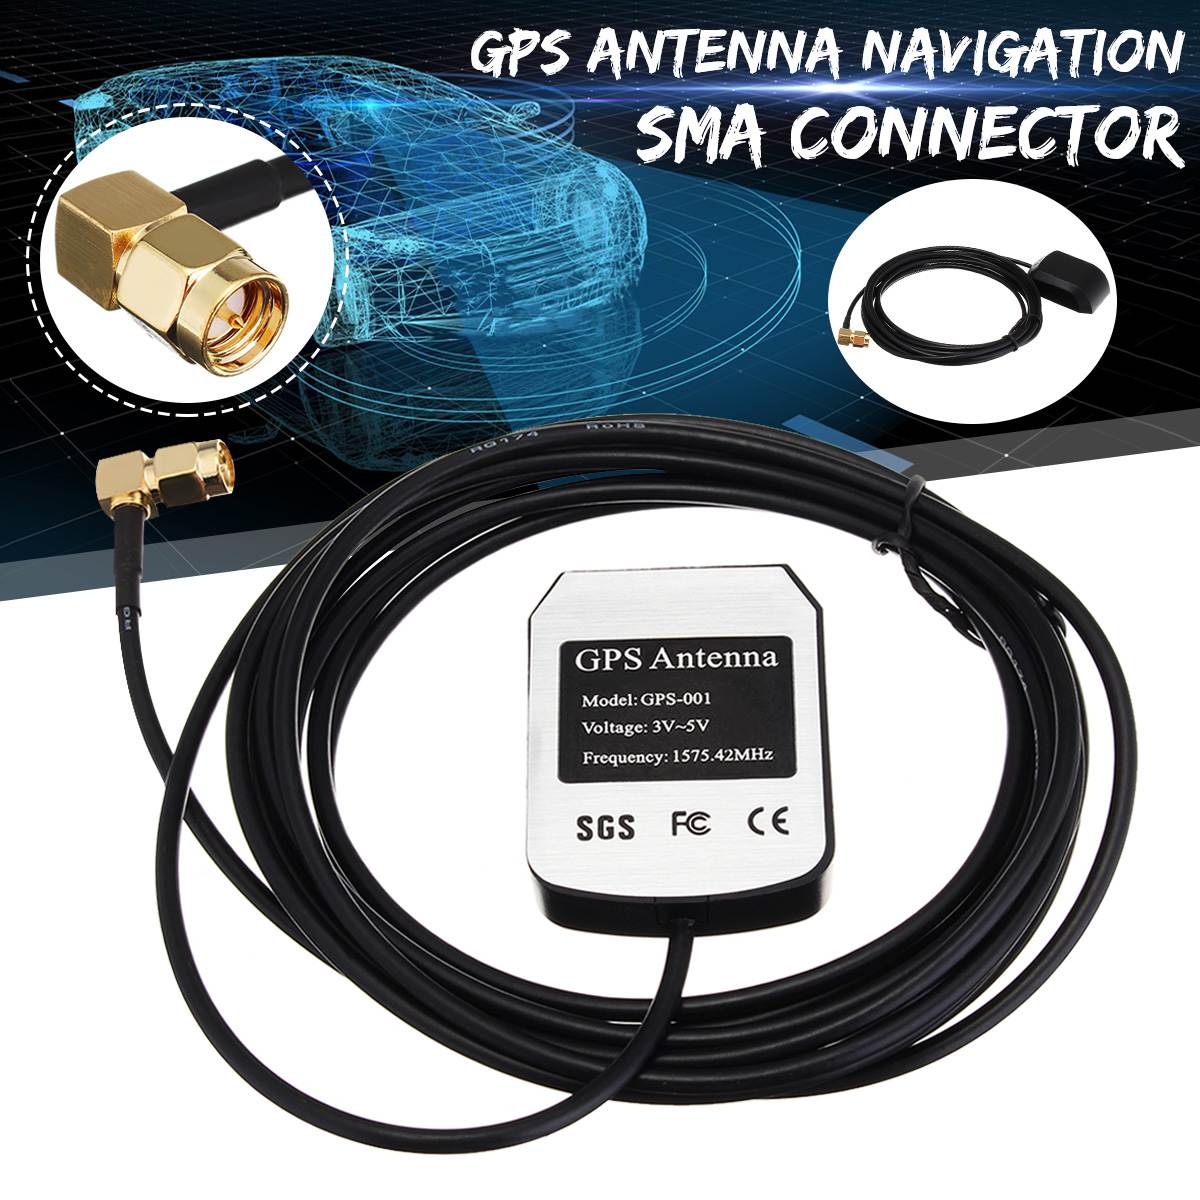 30cm GPS Antenna Navigation Positioning Aerial Curved Male SMA Connector Car Repeater Receiver Transmitter Vehicle GPS